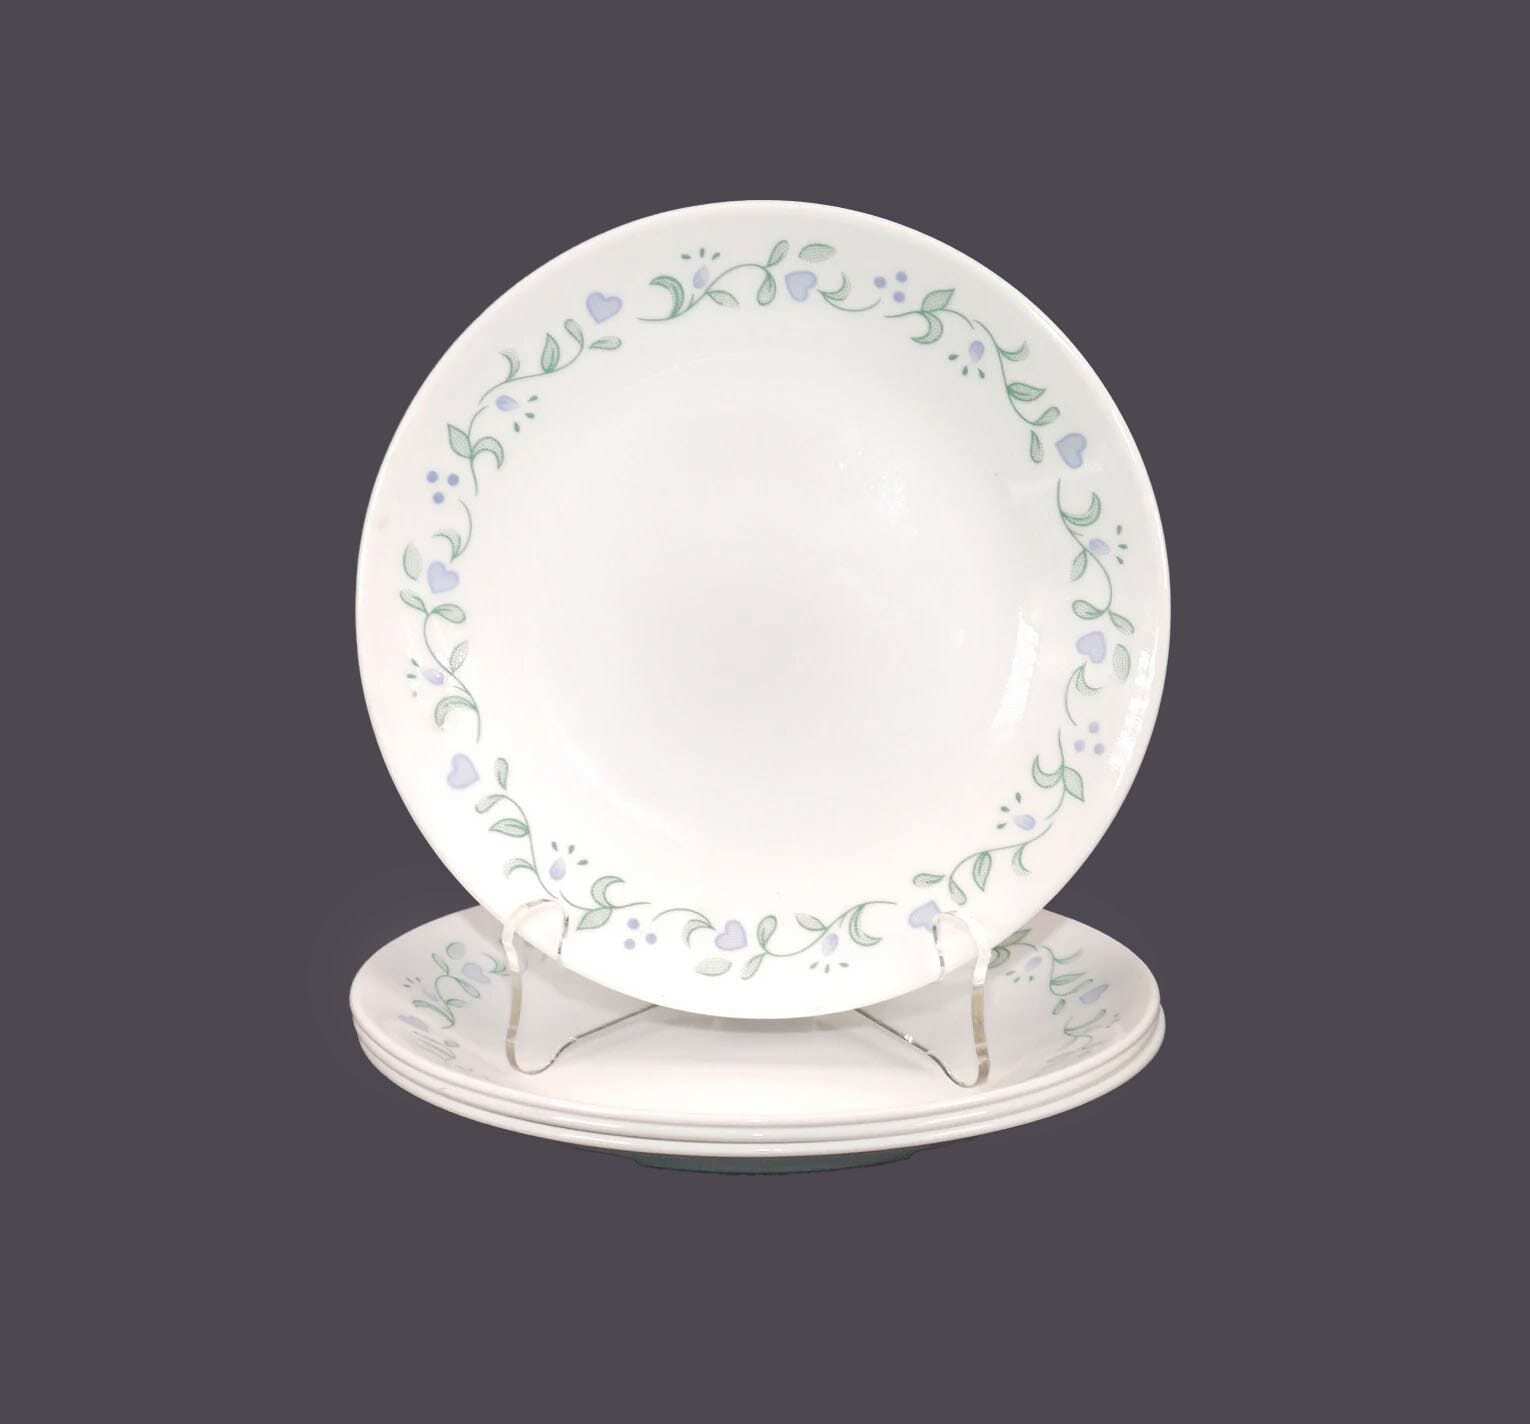 Corelle Country Cottage bread plates. Vintage Corningware made in the USA. - £42.61 GBP - £50.36 GBP